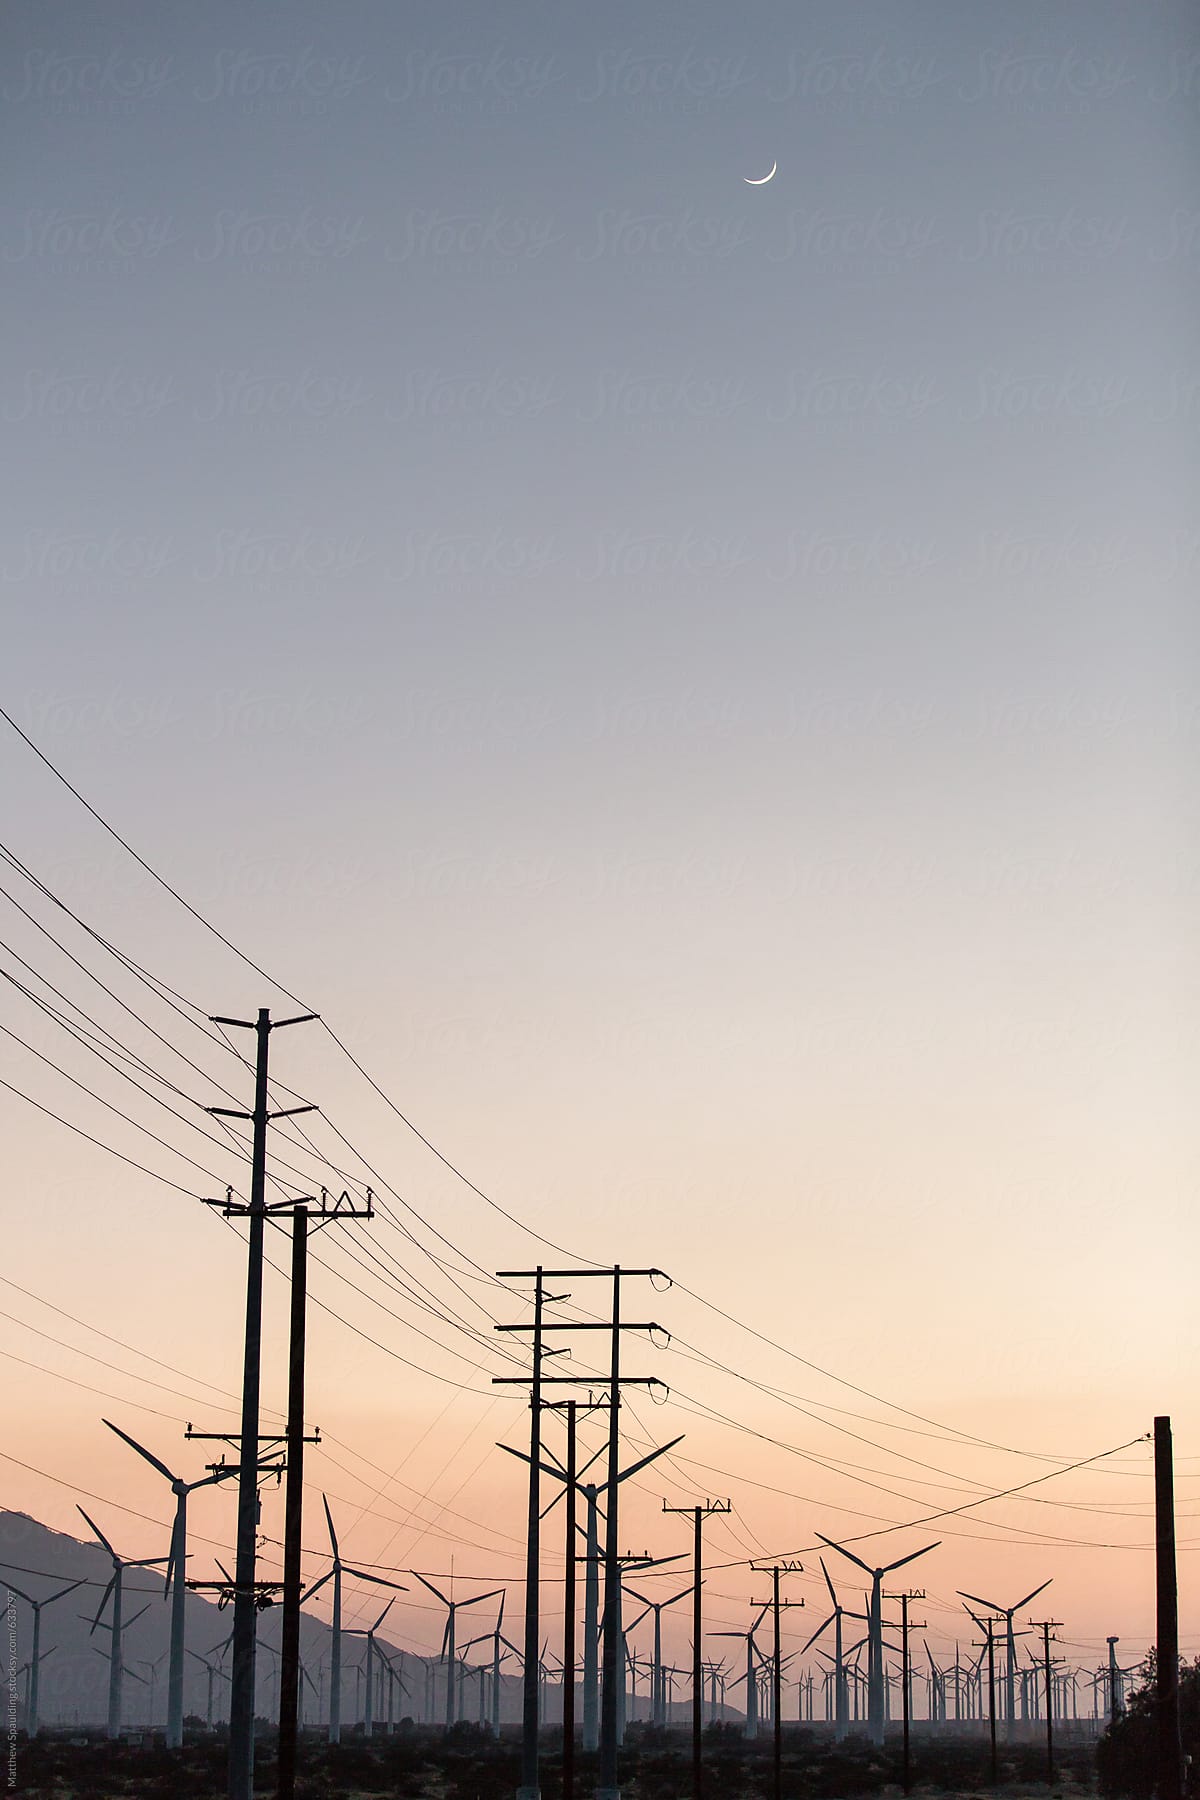 Power cables and wind turbines on landscape at sunset